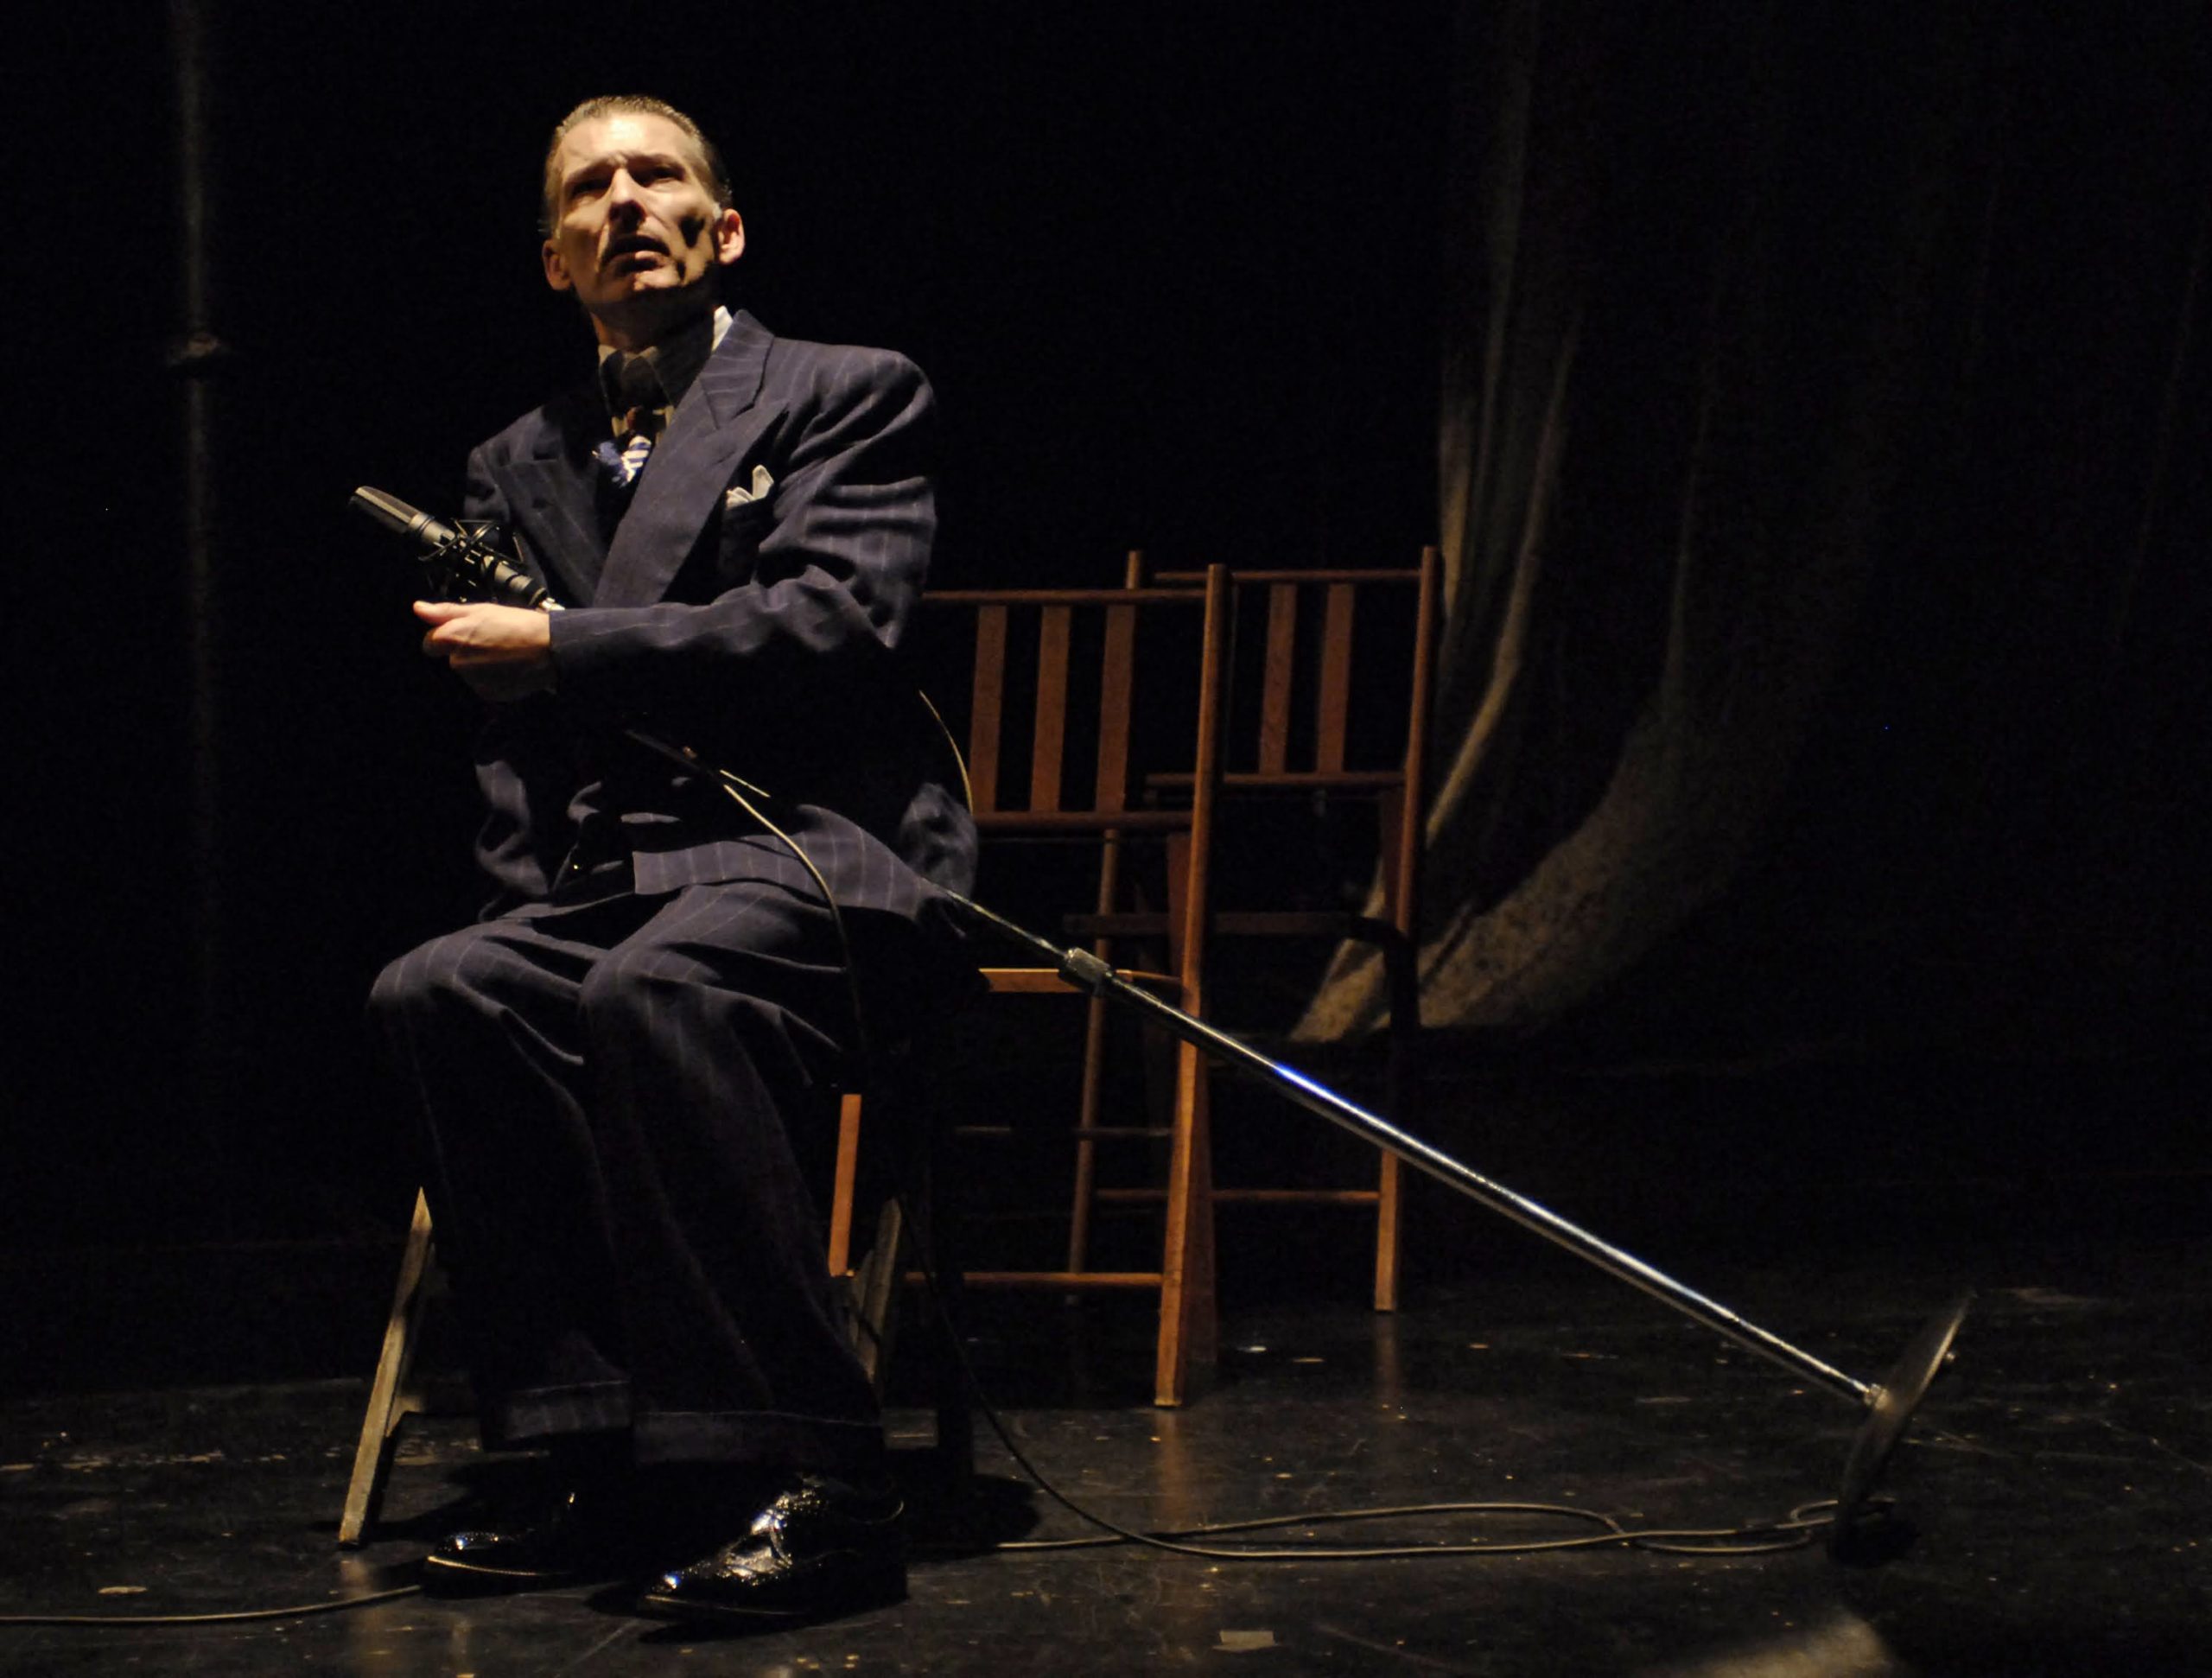 A man to the left of the frame wearing a full dark suit sitting in a chair holding a microphone stand that is leaning on his lap.